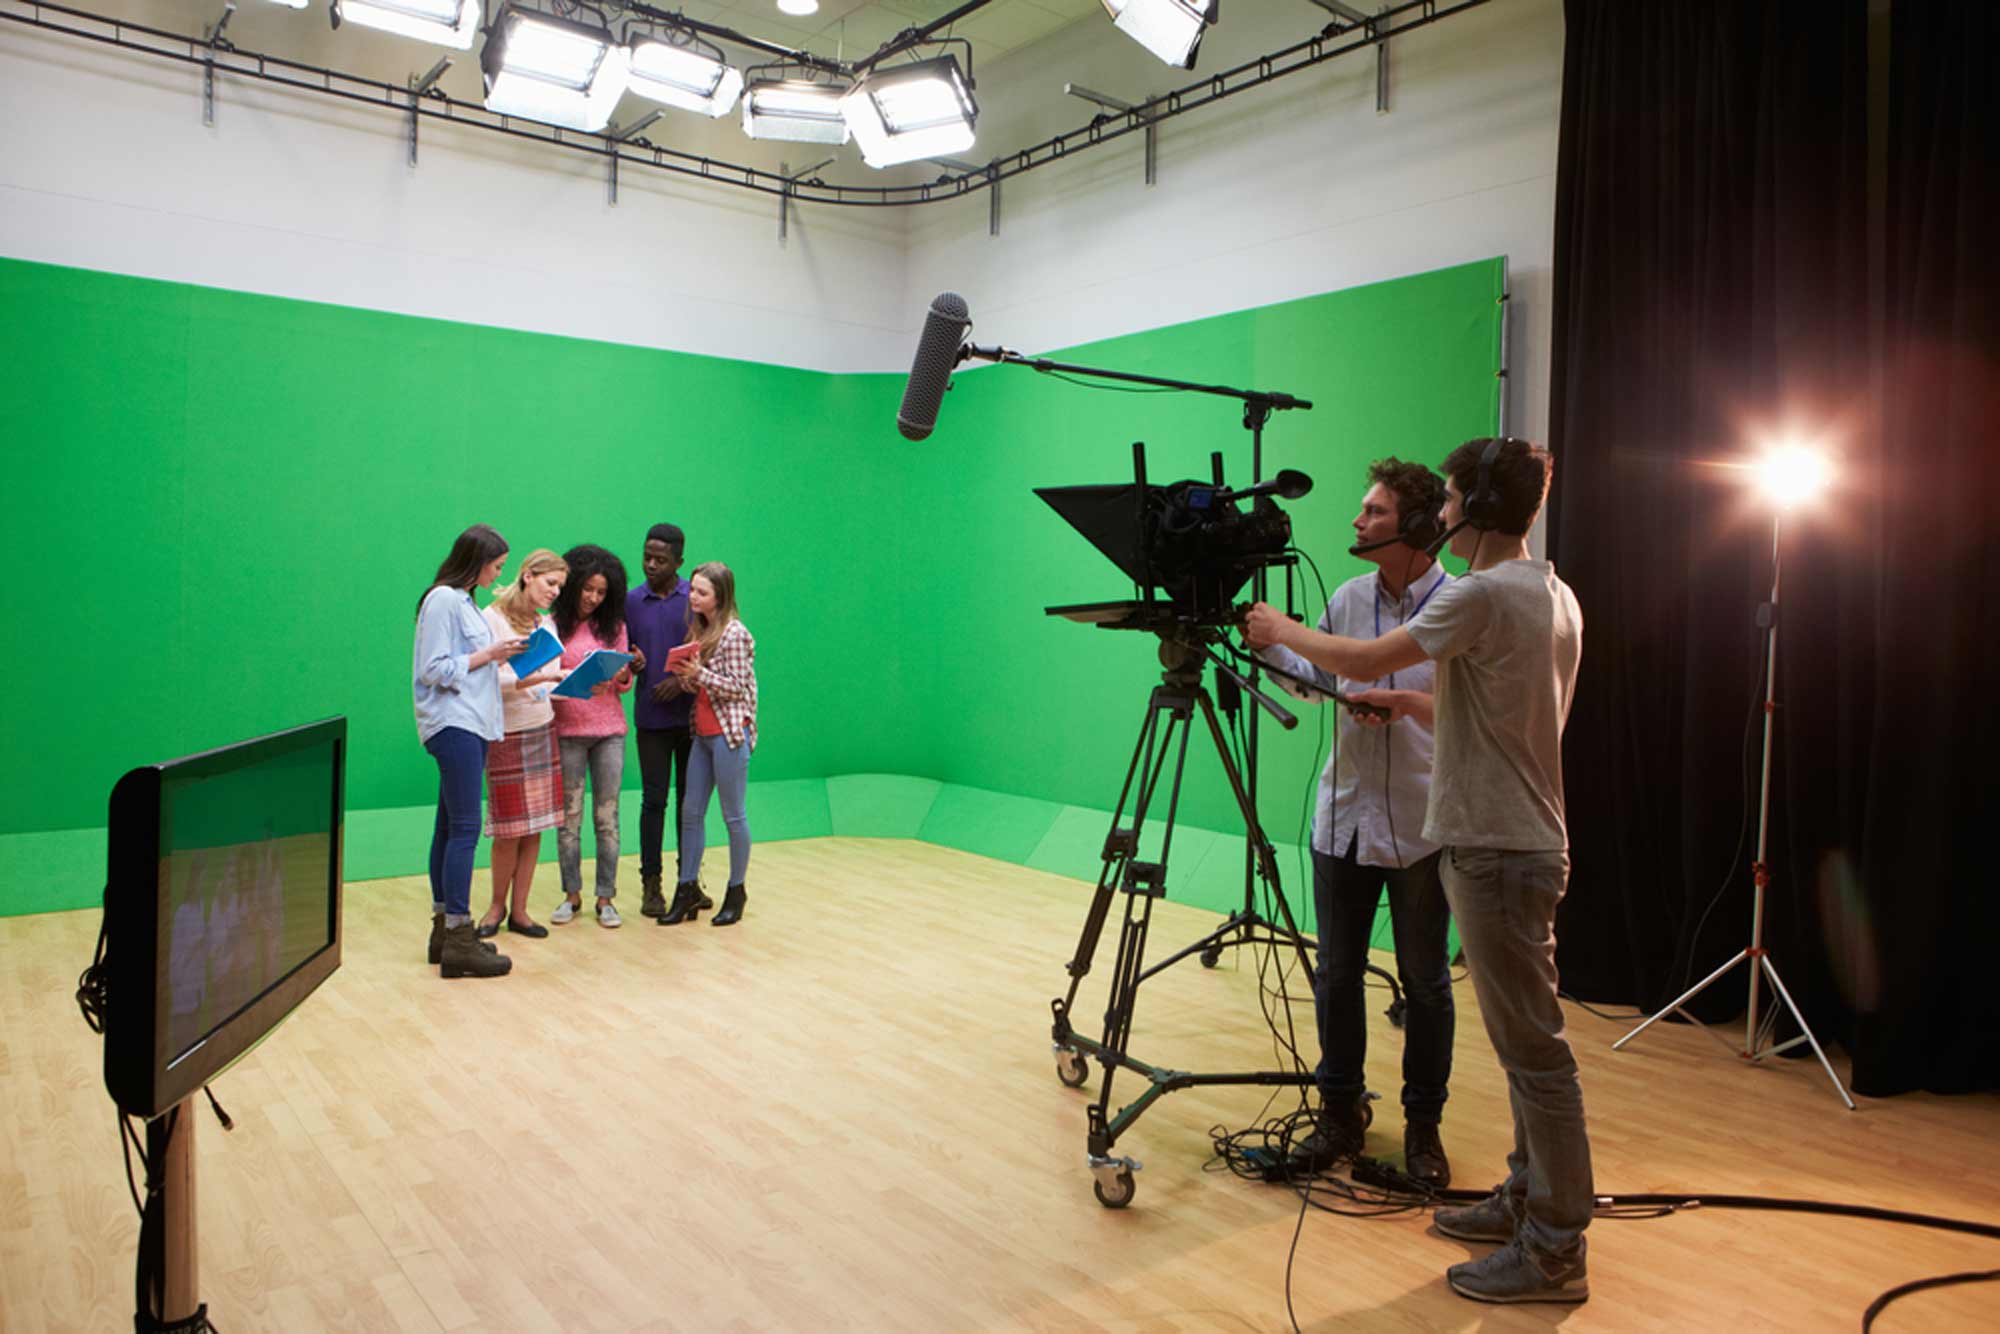 Common Uses Of A Green Screen